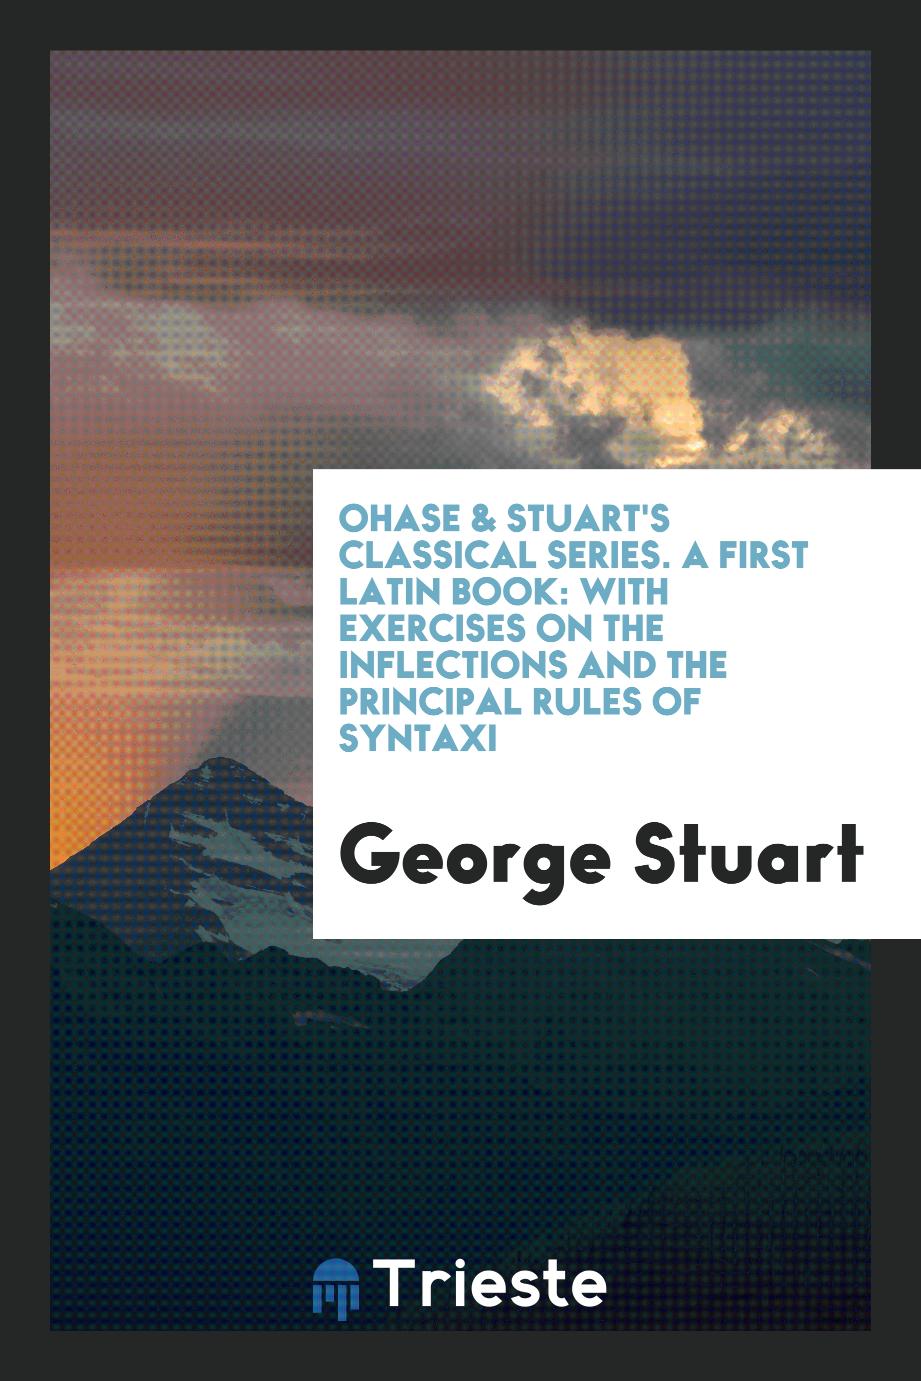 Ohase & Stuart's Classical Series. A First Latin Book: With Exercises on the Inflections and the Principal Rules of Syntaxi